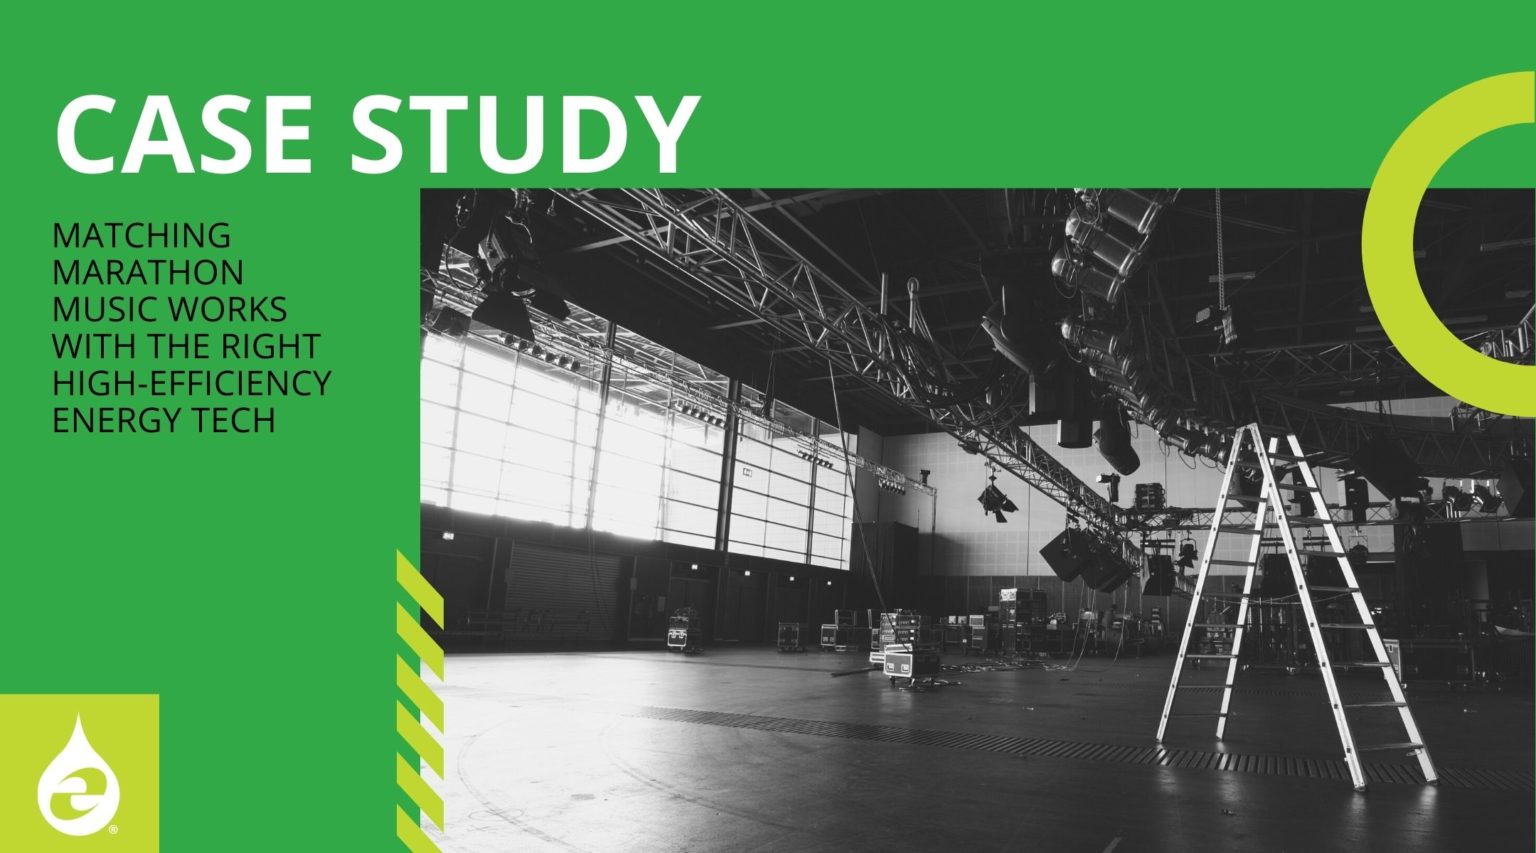 Case Study: Matching Marathon Music Works With the Right High-Efficiency Energy Tech